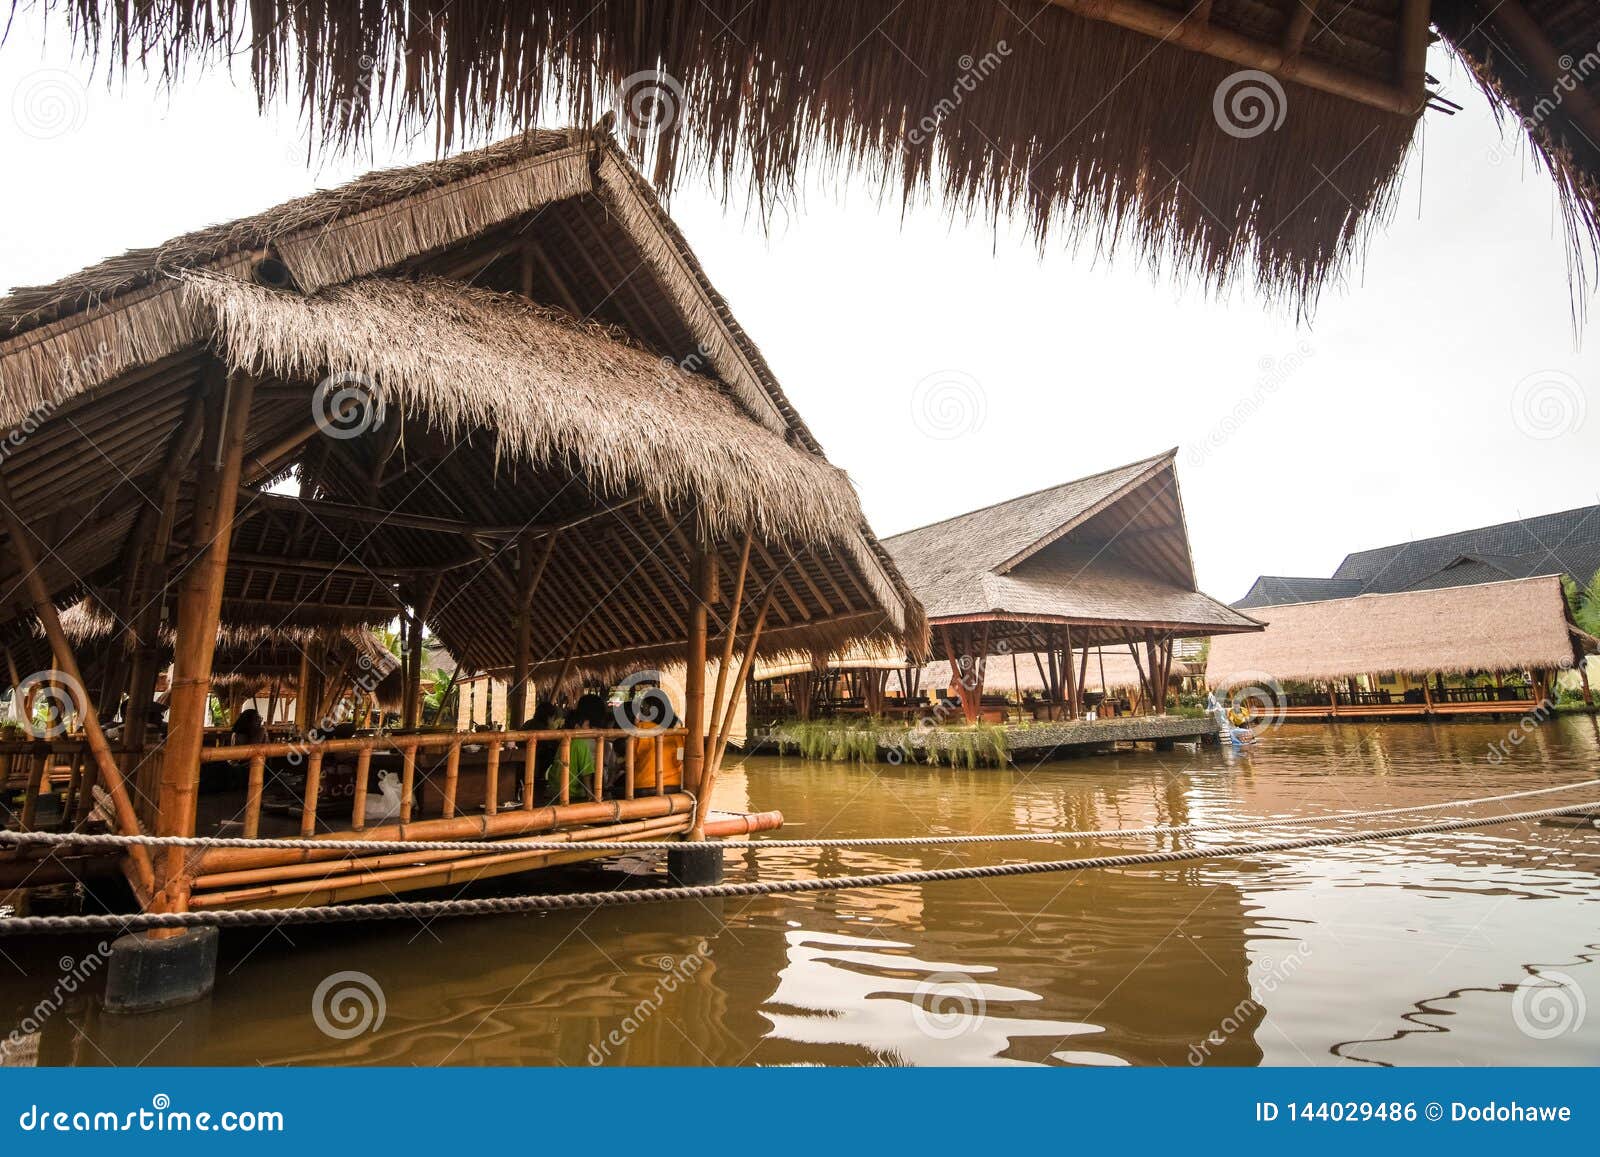 Restaurant, The Building Made By Bamboo Above The Fish